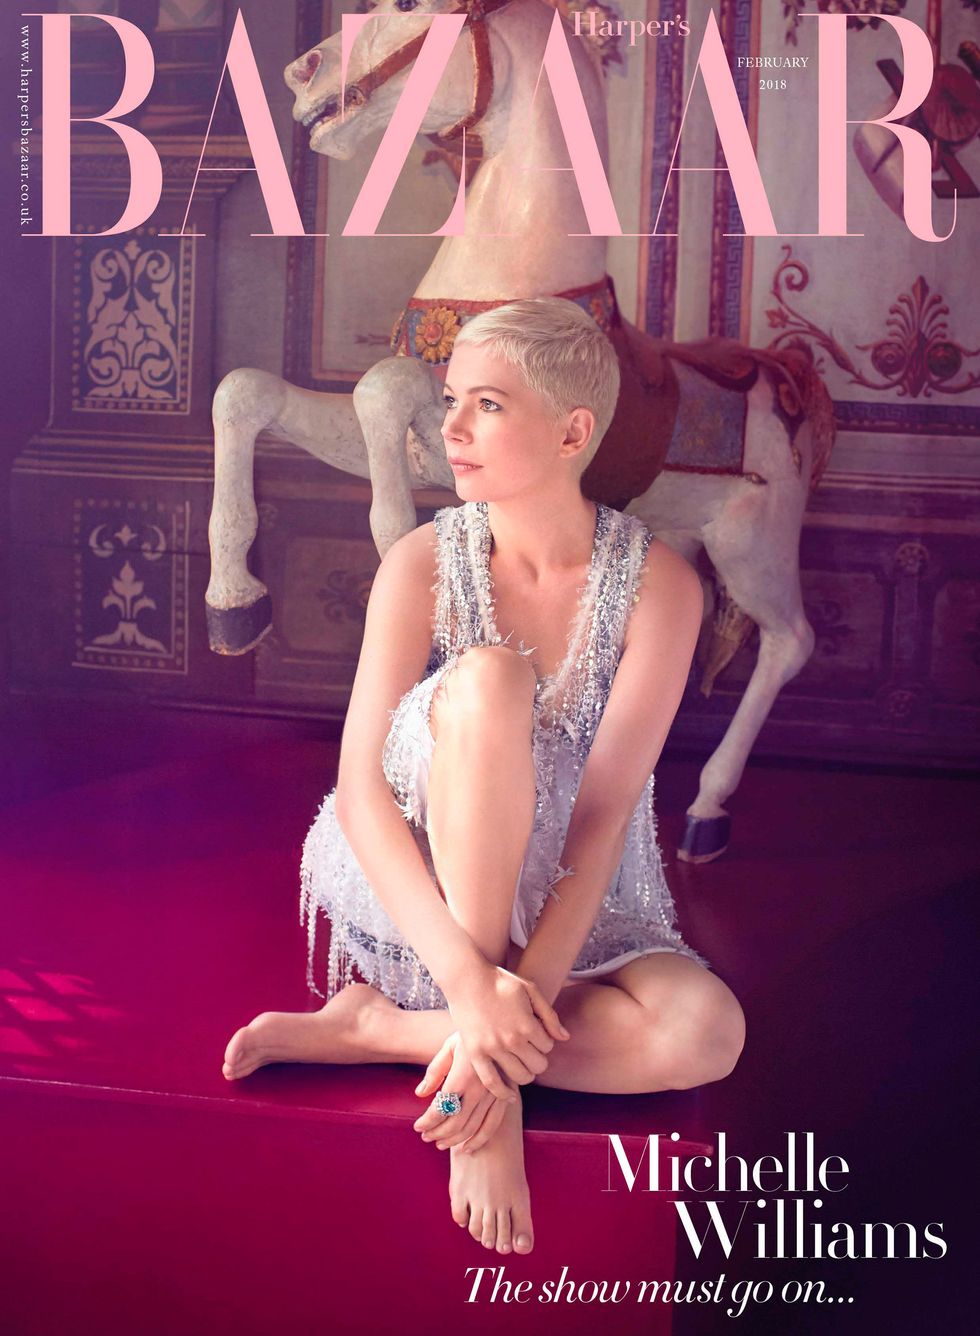 Michelle Williams on subscribers' cover